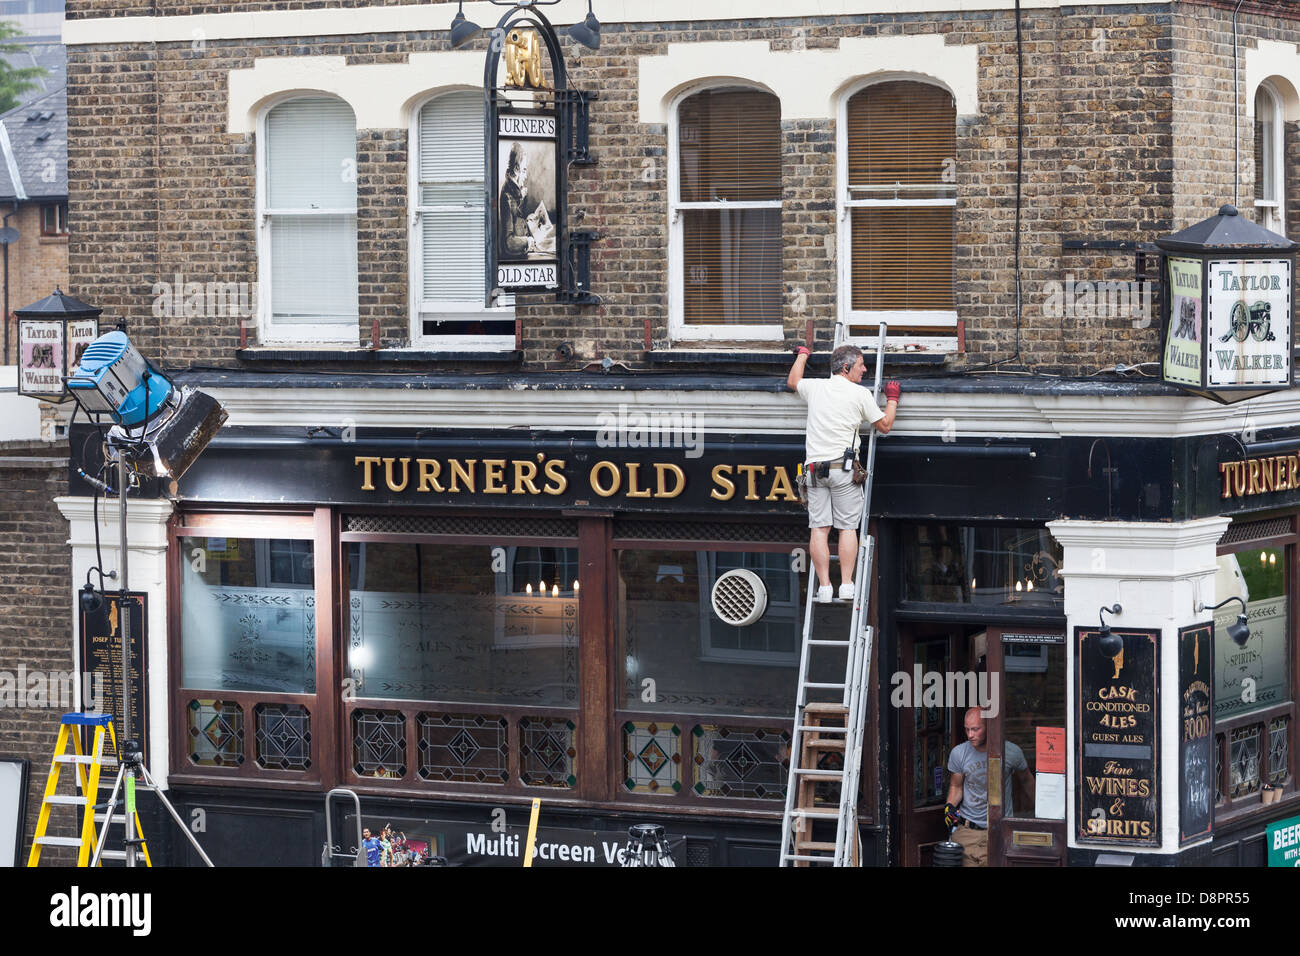 Film crew setting up on location outside Turners Old Star public house, east End. Stock Photo